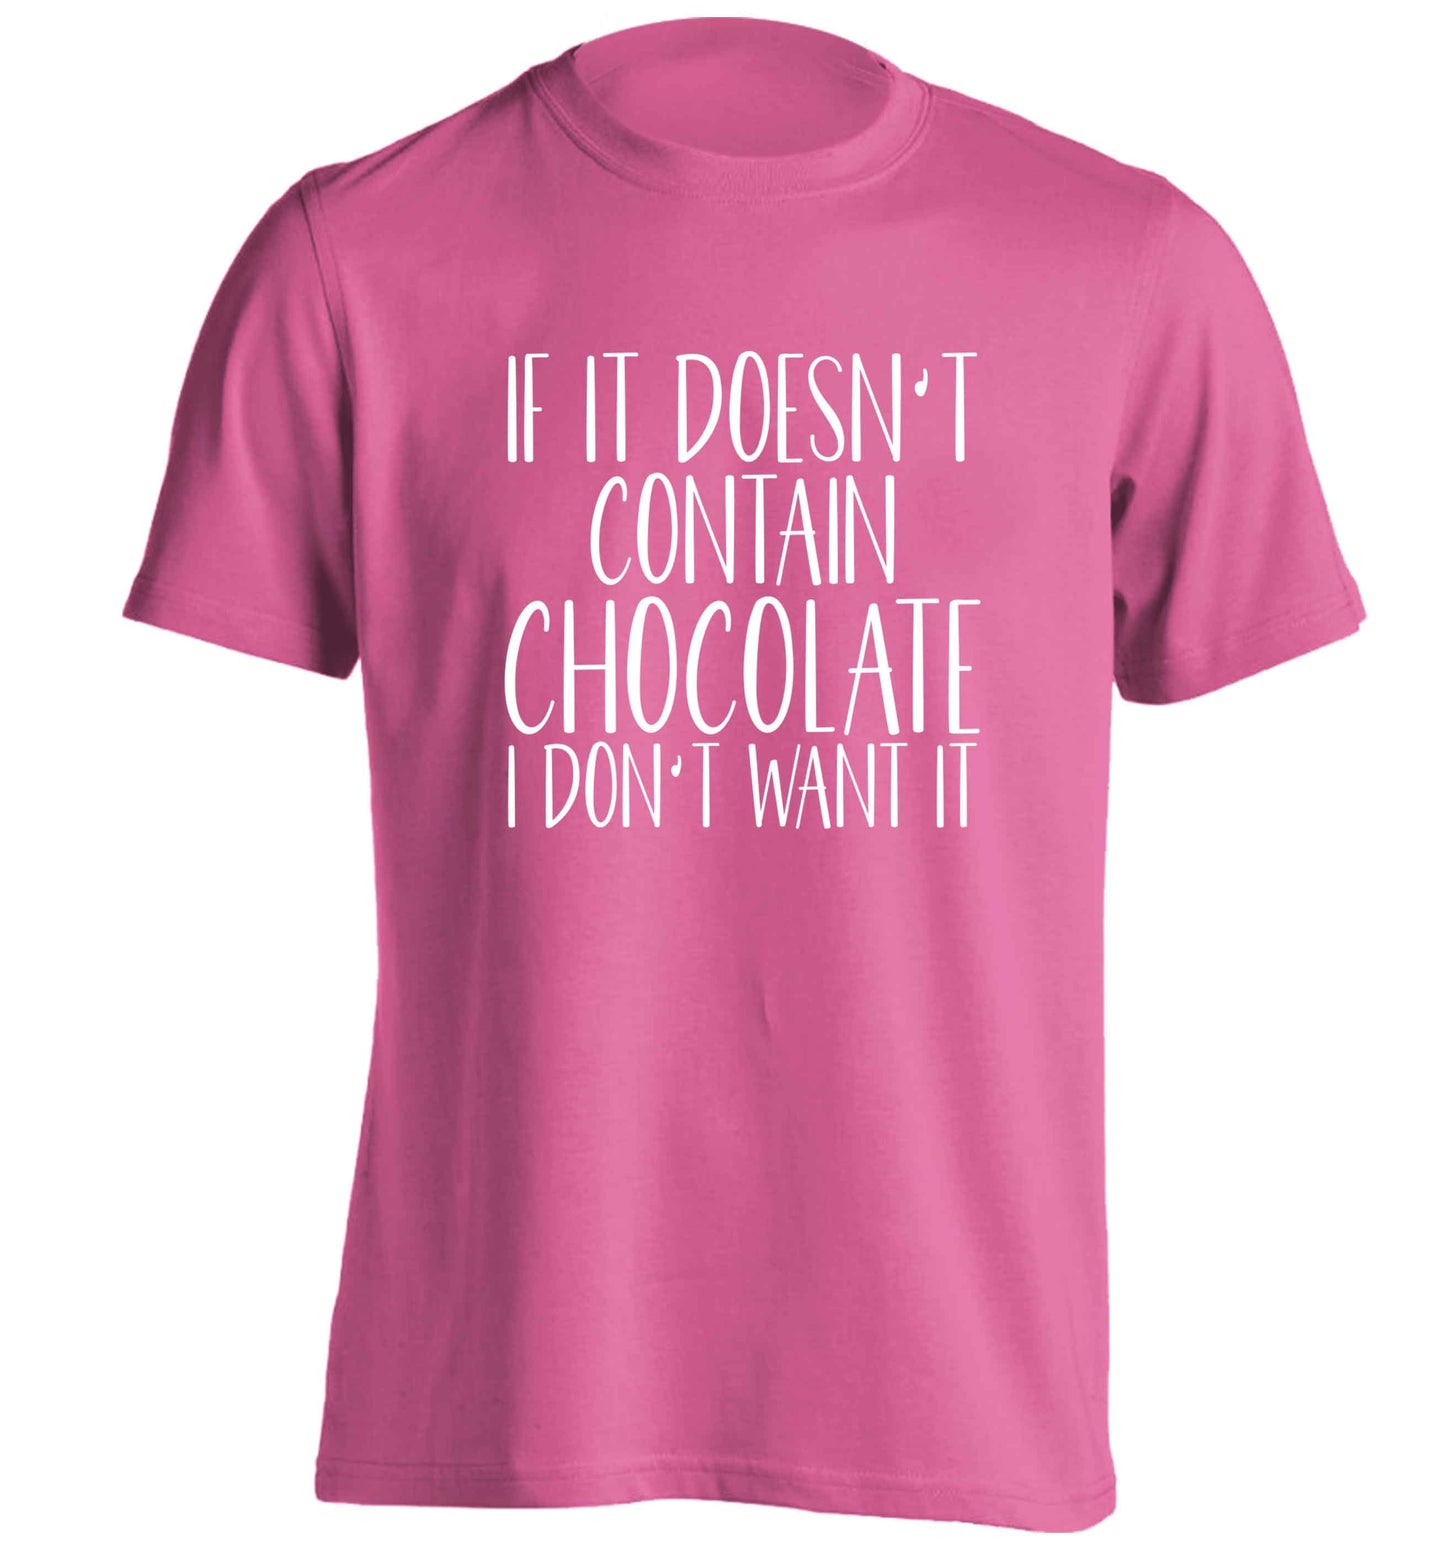 If it doesn't contain chocolate I don't want it adults unisex pink Tshirt 2XL